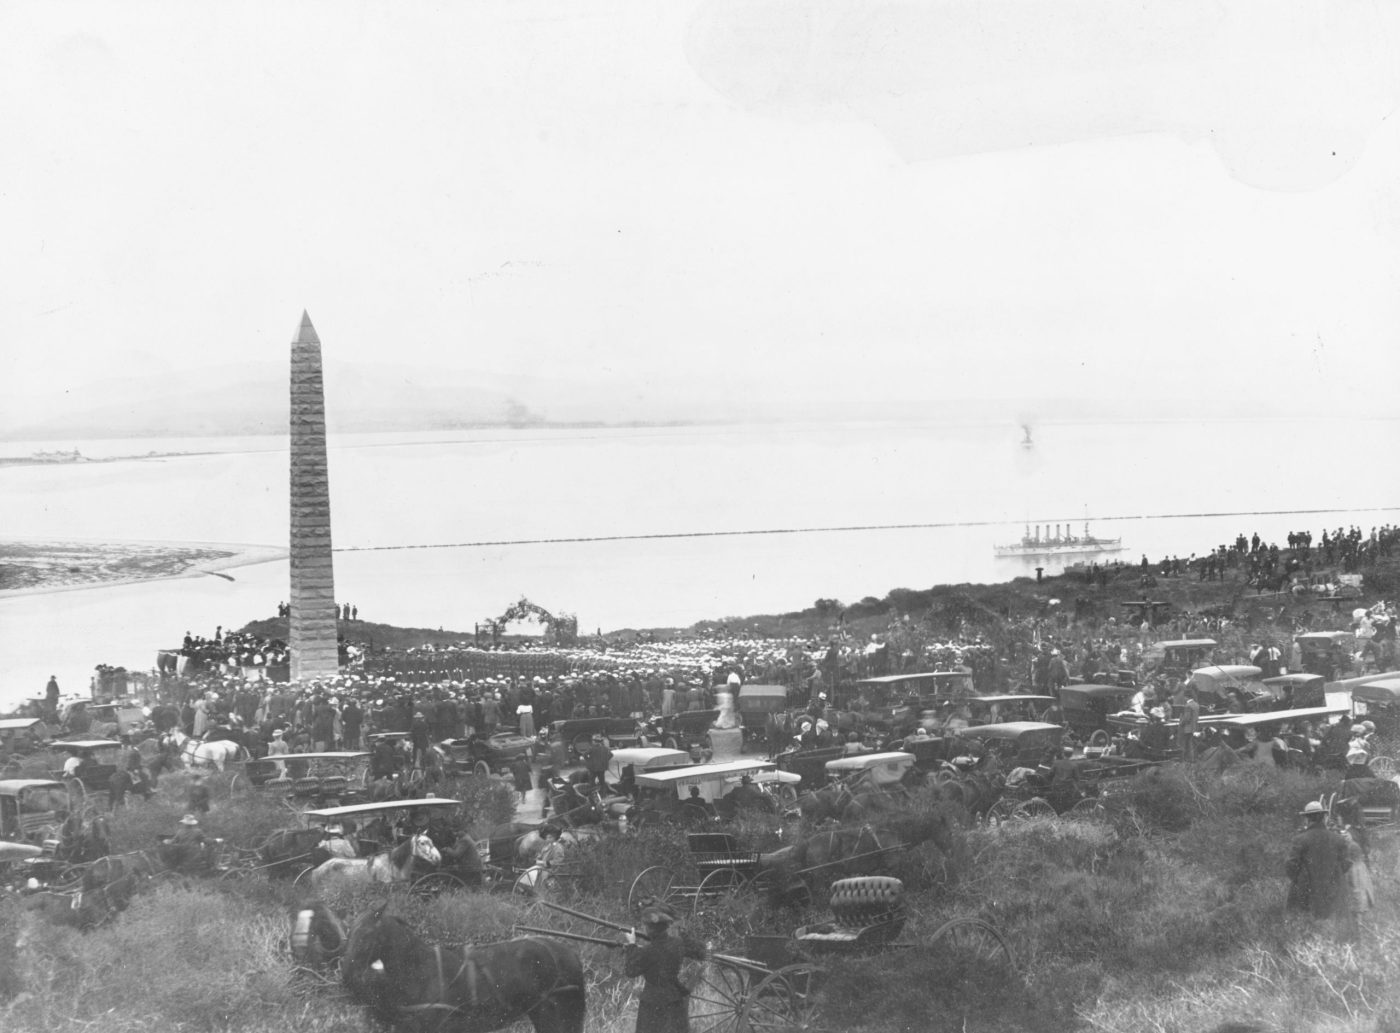 Ceremony dedicating the Bennington monument at Fort Rosecrans, overlooking San Diego harbor, January 7, 1908. The cruiser USS Charleston is visible in the background right. More than 2,500 people attended the dedication. (NHHC)